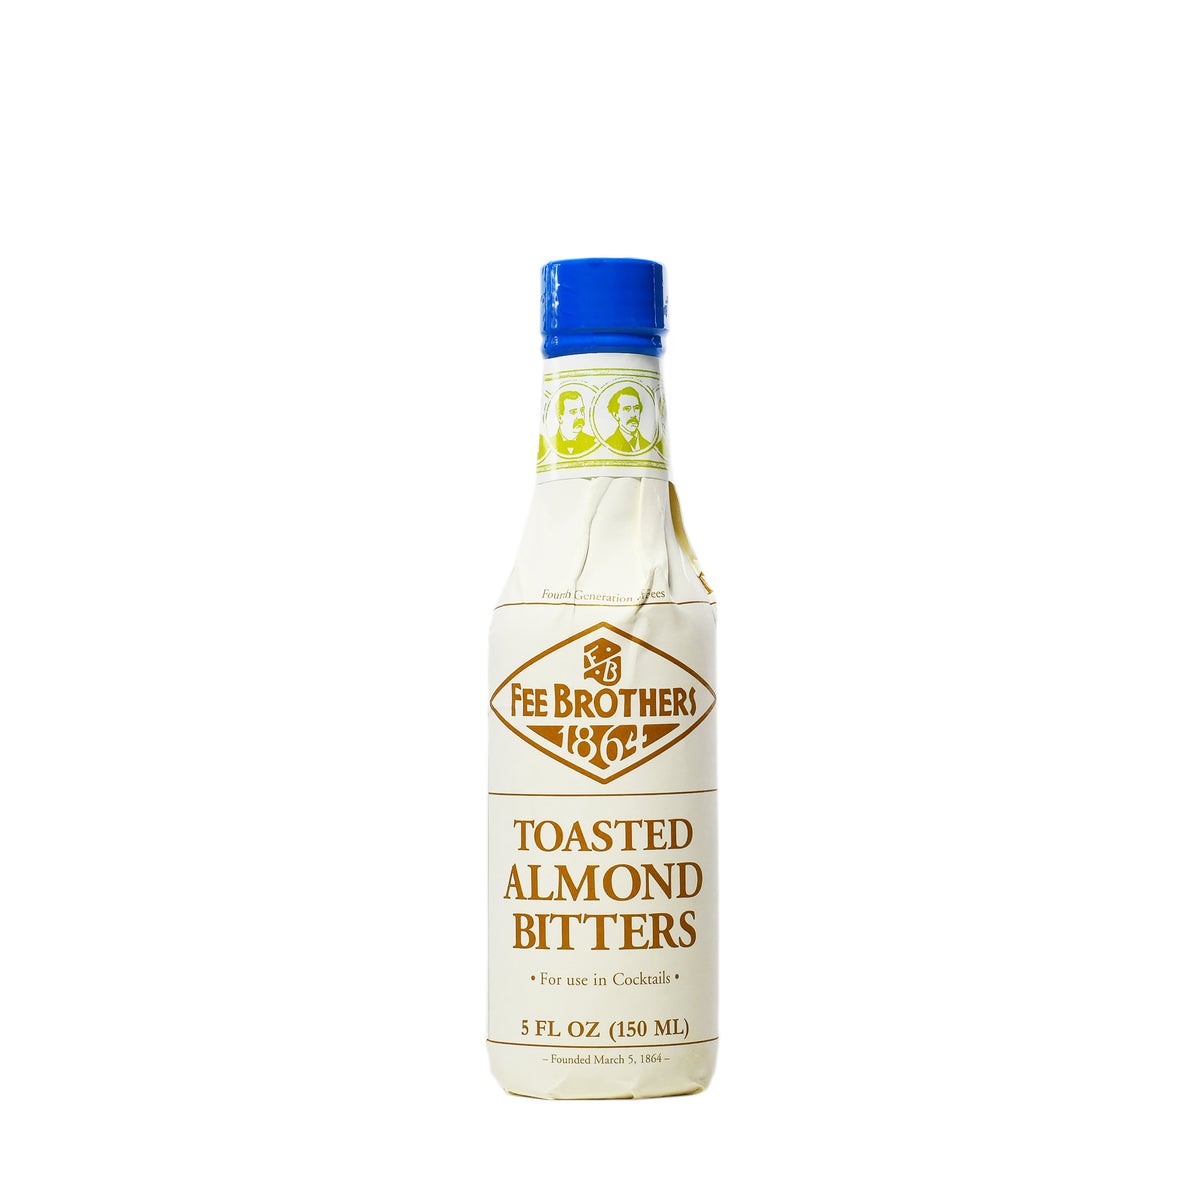 FEE BROTHERS - BITTERS - TOASTED ALMOND